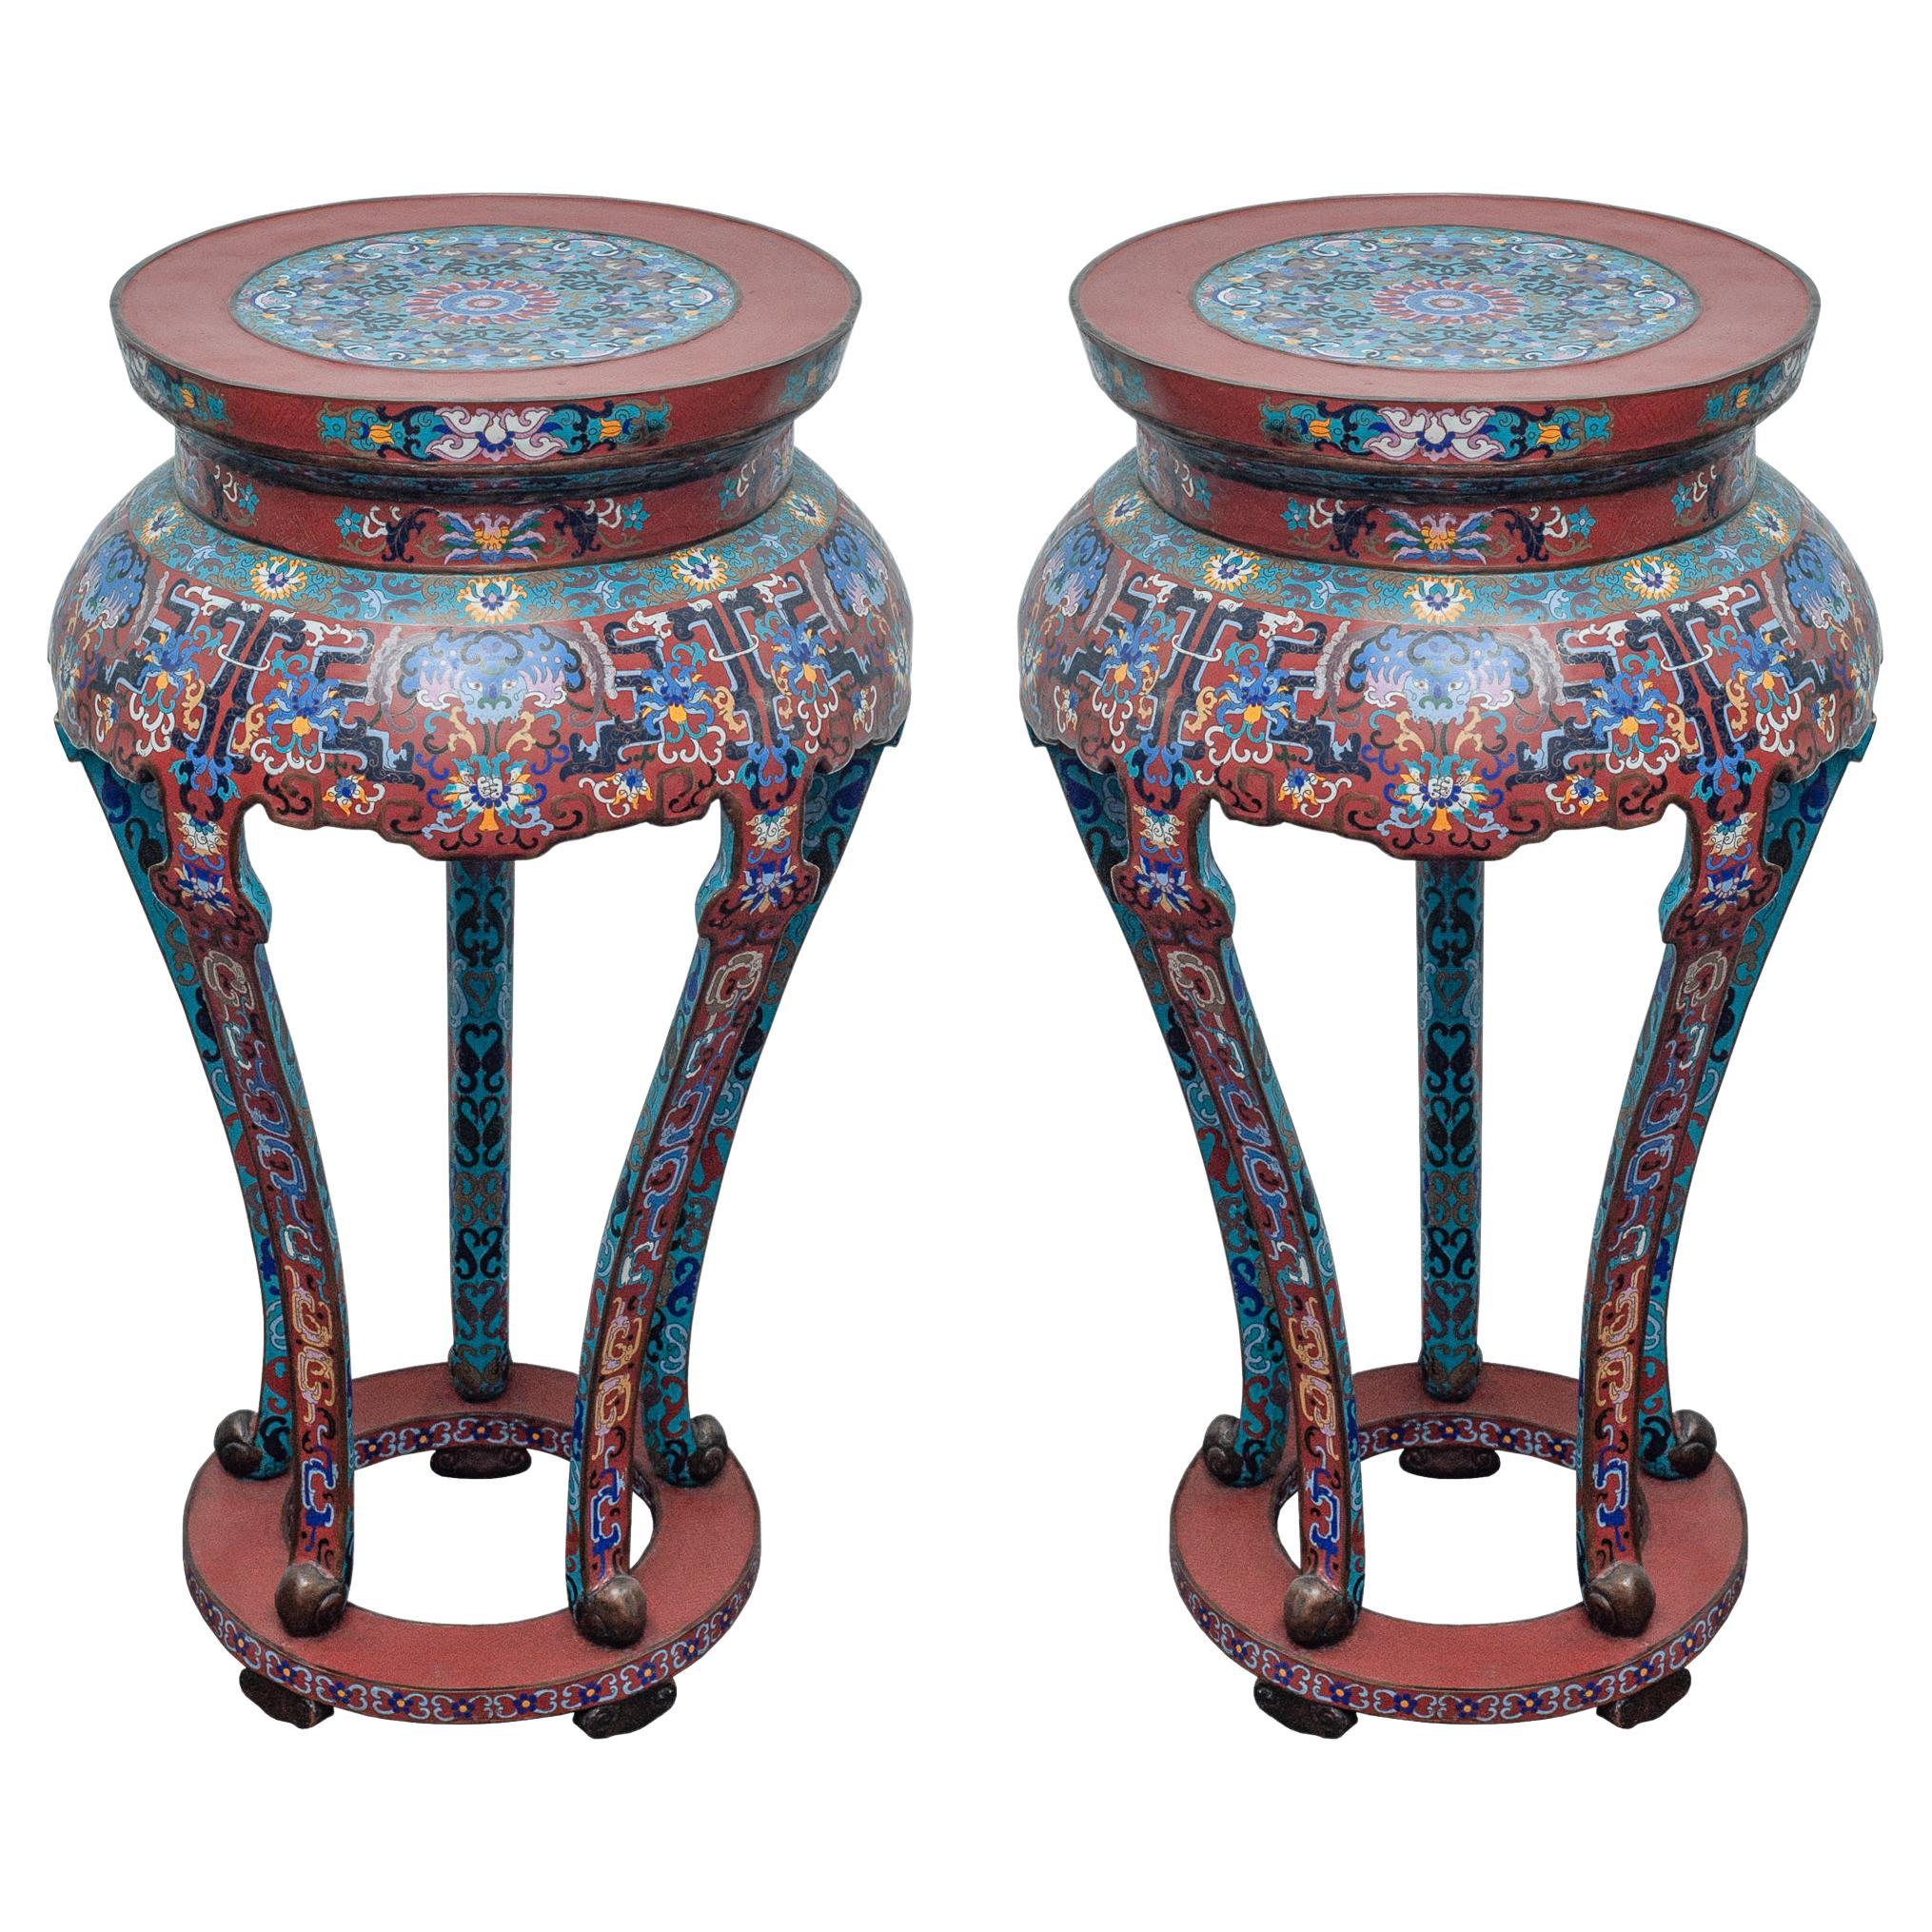 Antique Pair of Red, Blue and Multicoloured Cloisonné Tables For Sale